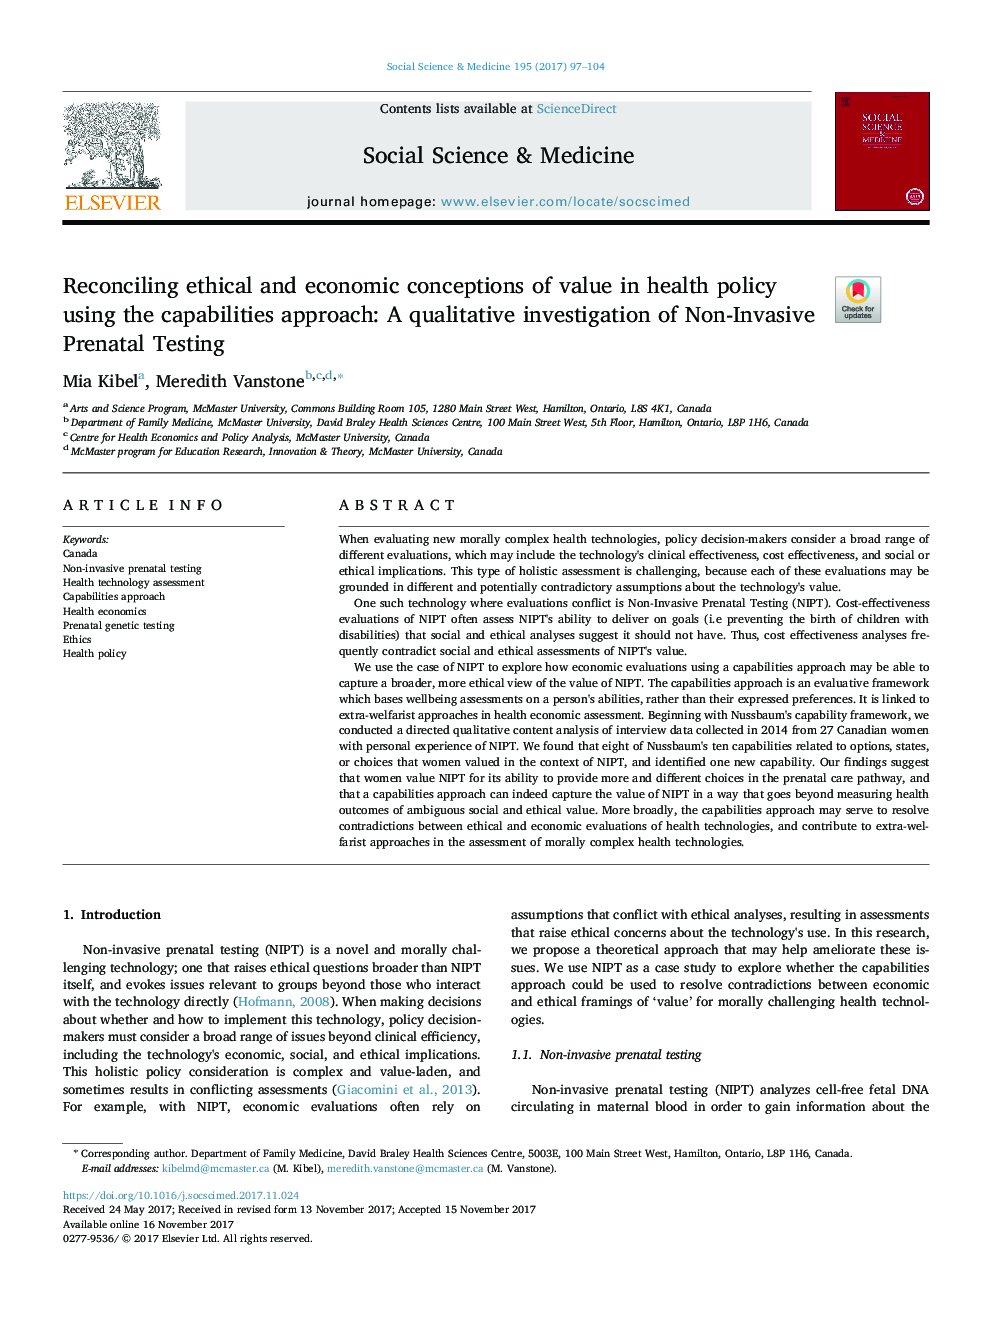 Reconciling ethical and economic conceptions of value in health policy using the capabilities approach: A qualitative investigation of Non-Invasive Prenatal Testing